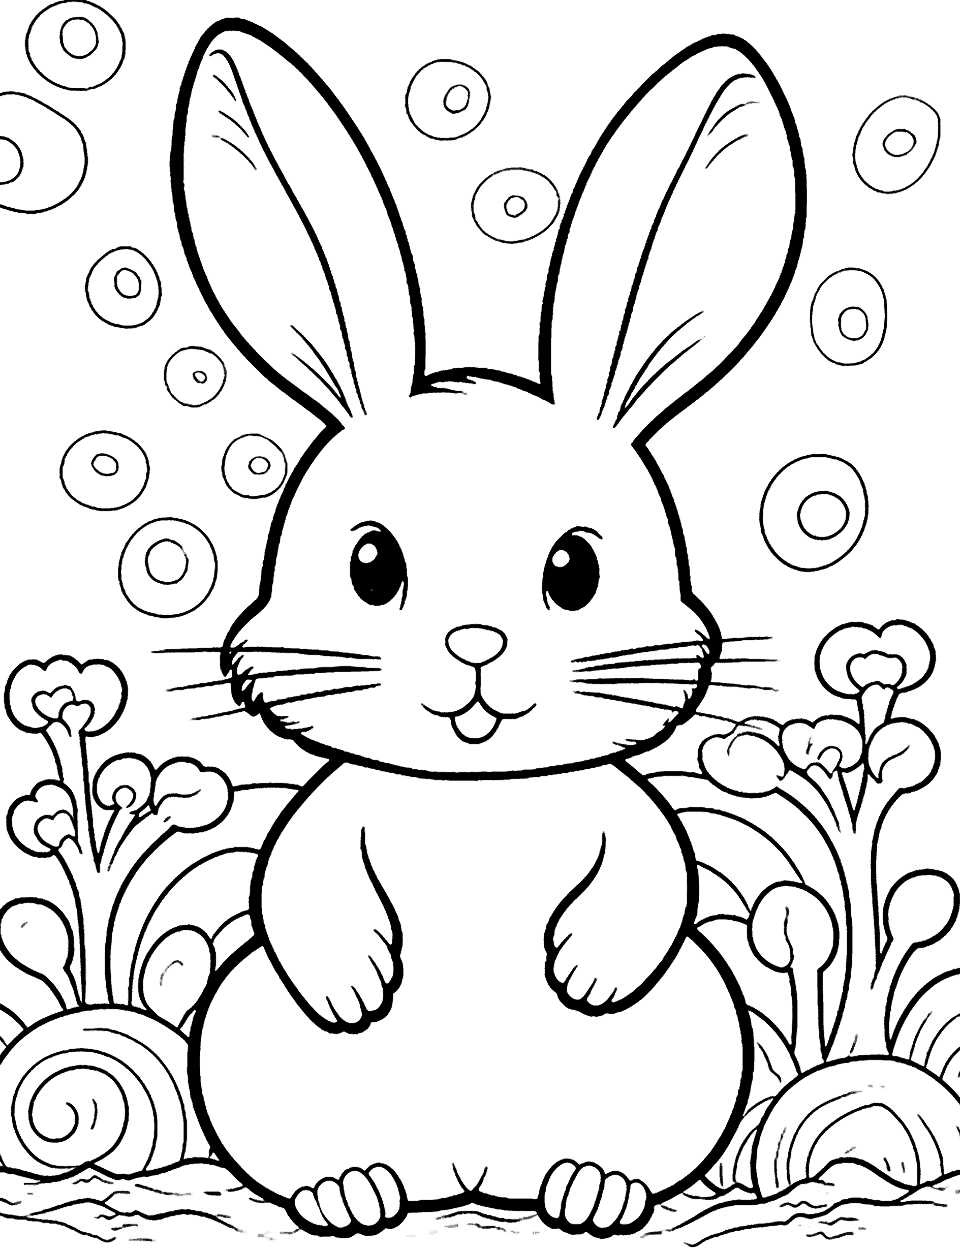 Full-Size Bunny Easter Coloring Page - A large-sized bunny with long ears, inviting kids to color it with their favorite hues.